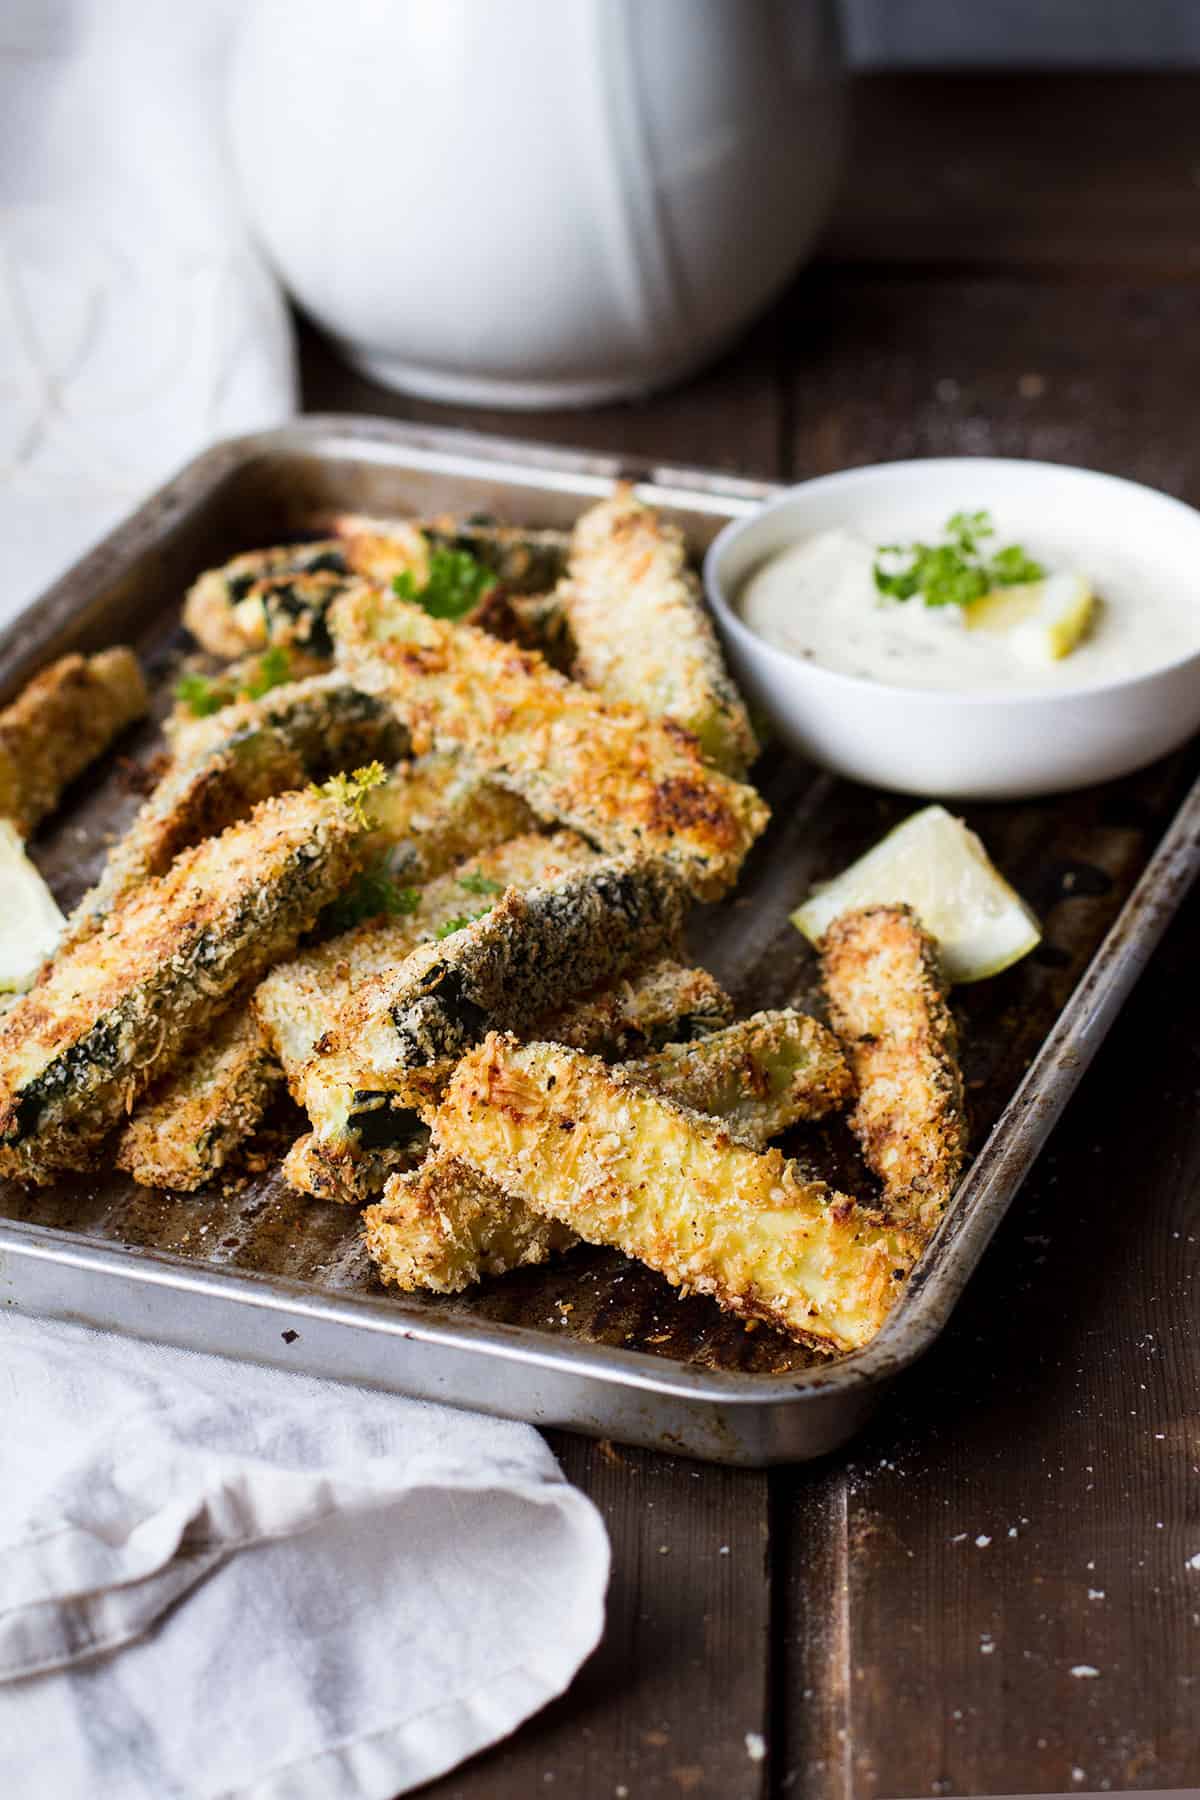 An old baking tray with zucchini sticks and dipping sauce.